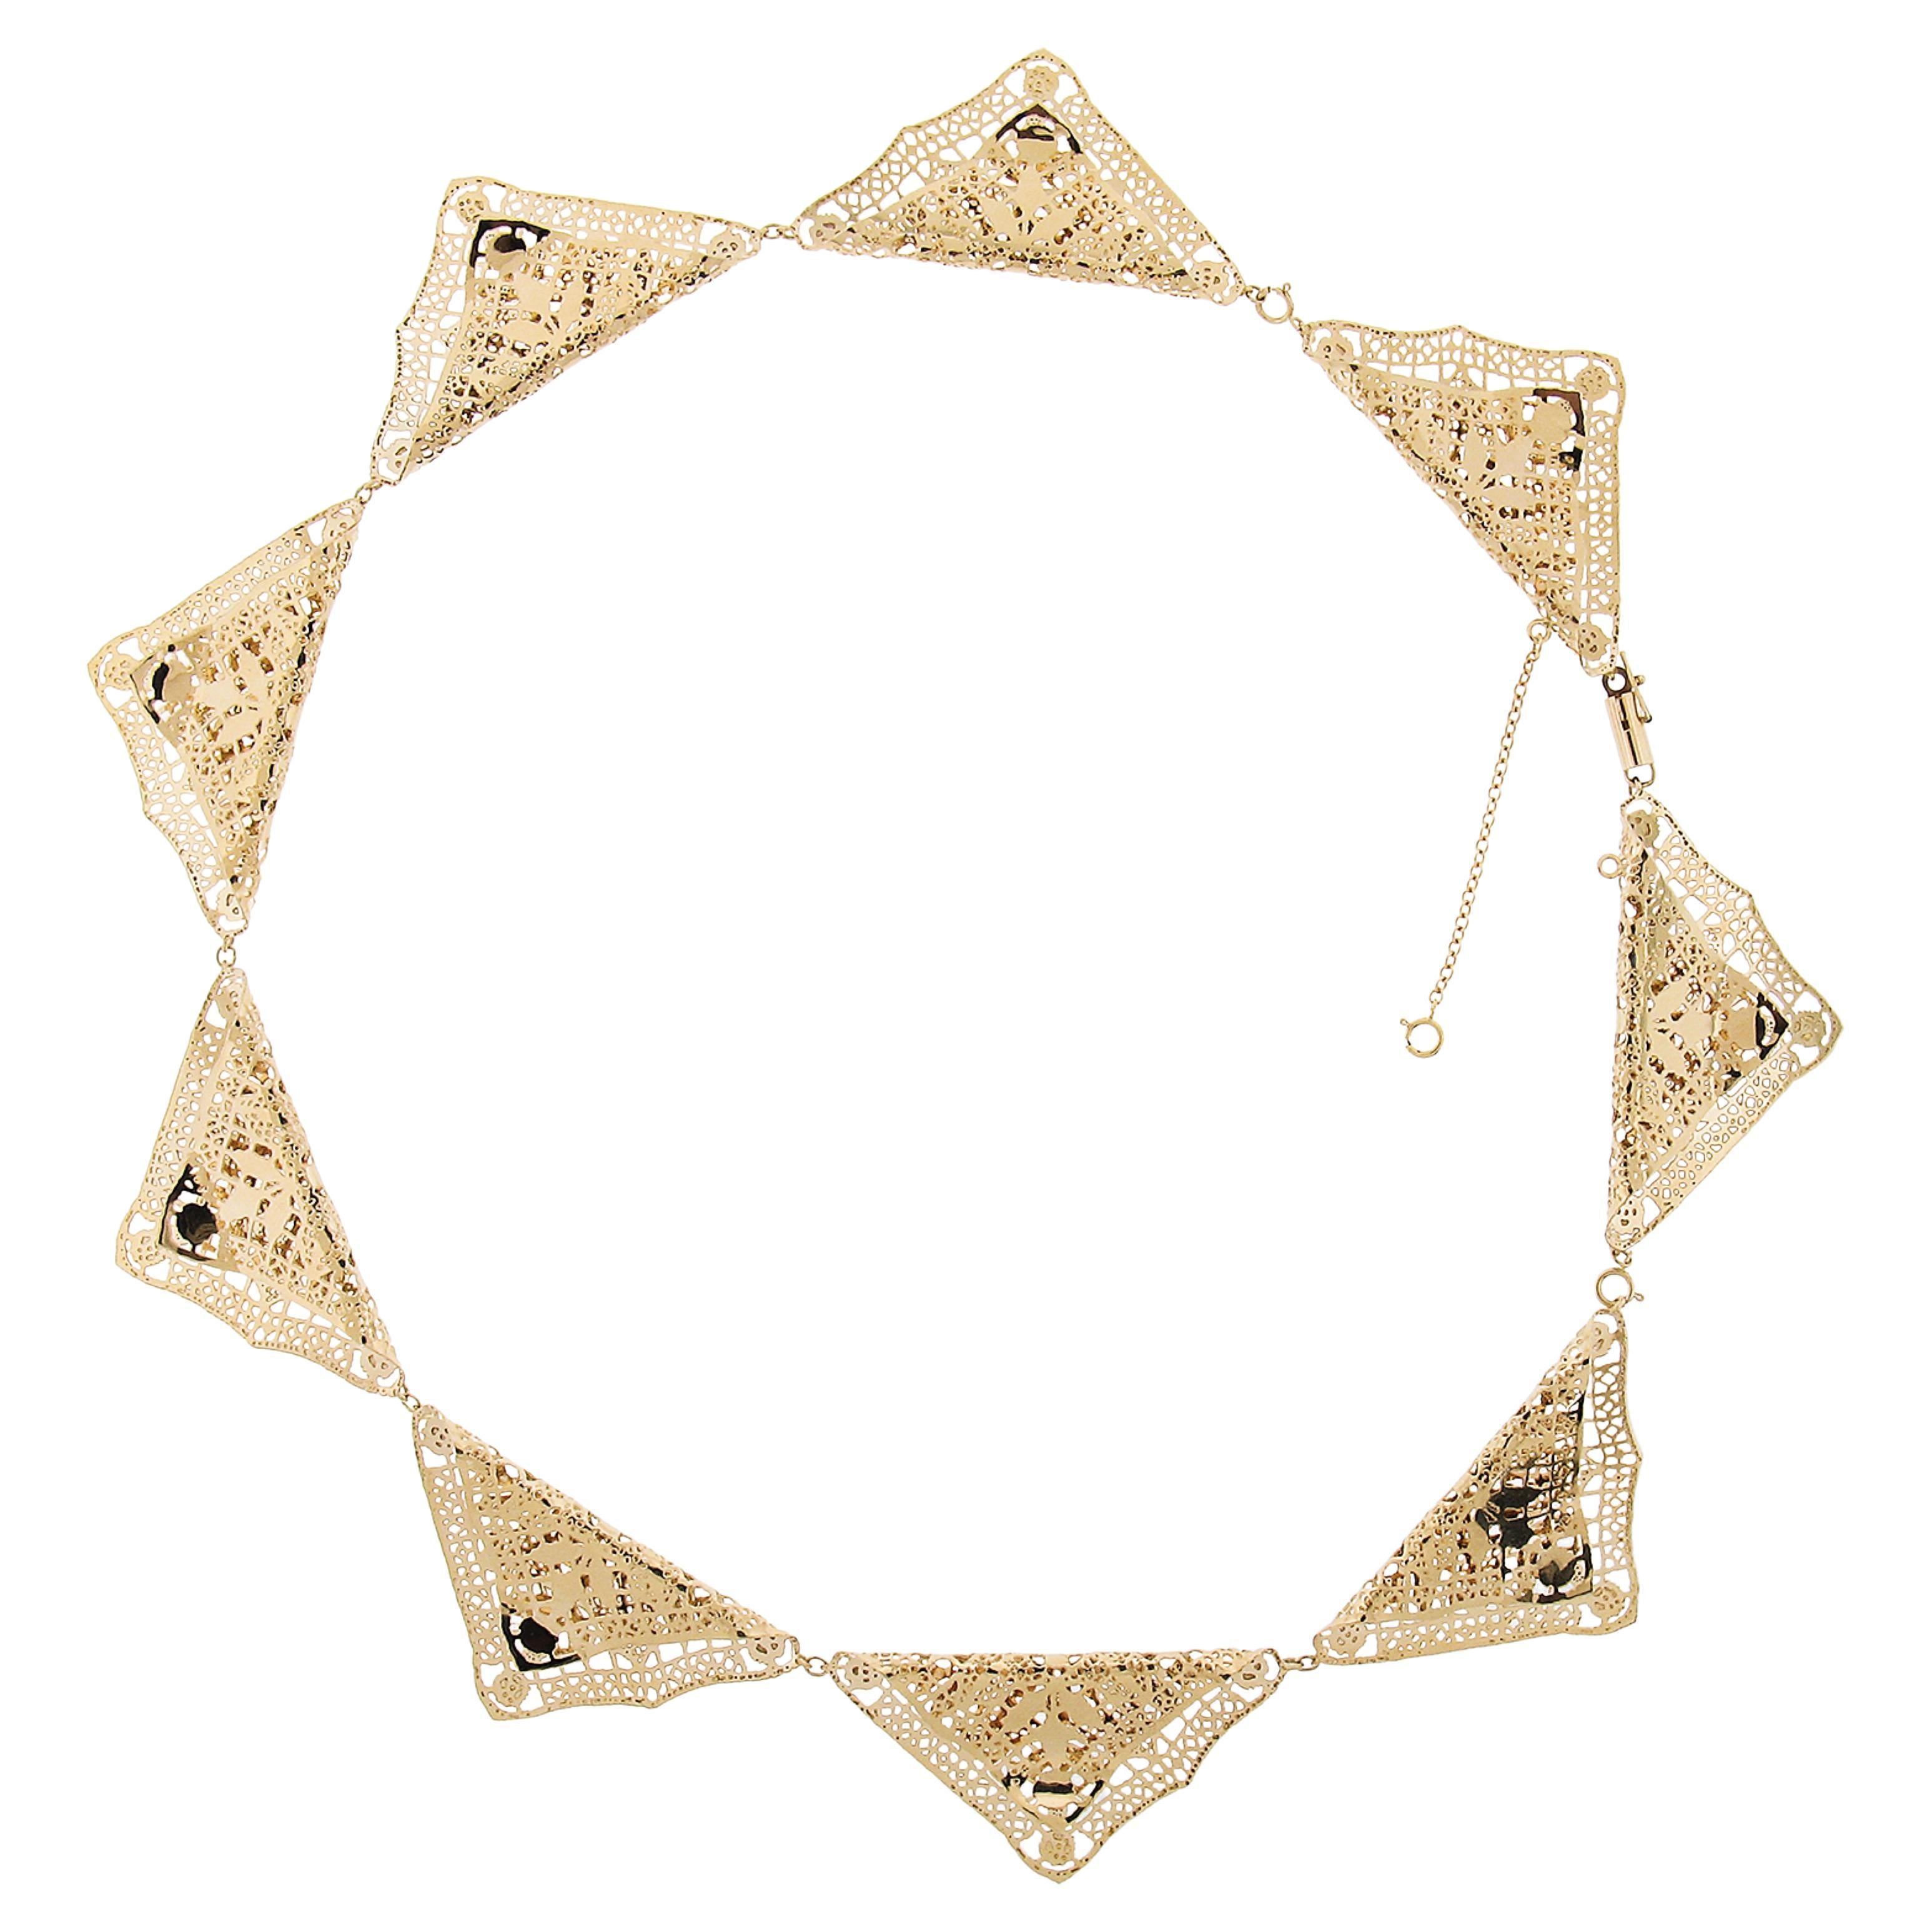 Vintage 14K Gold Polished Lacy Filigree Folded Triangular Shape Chain Necklace For Sale